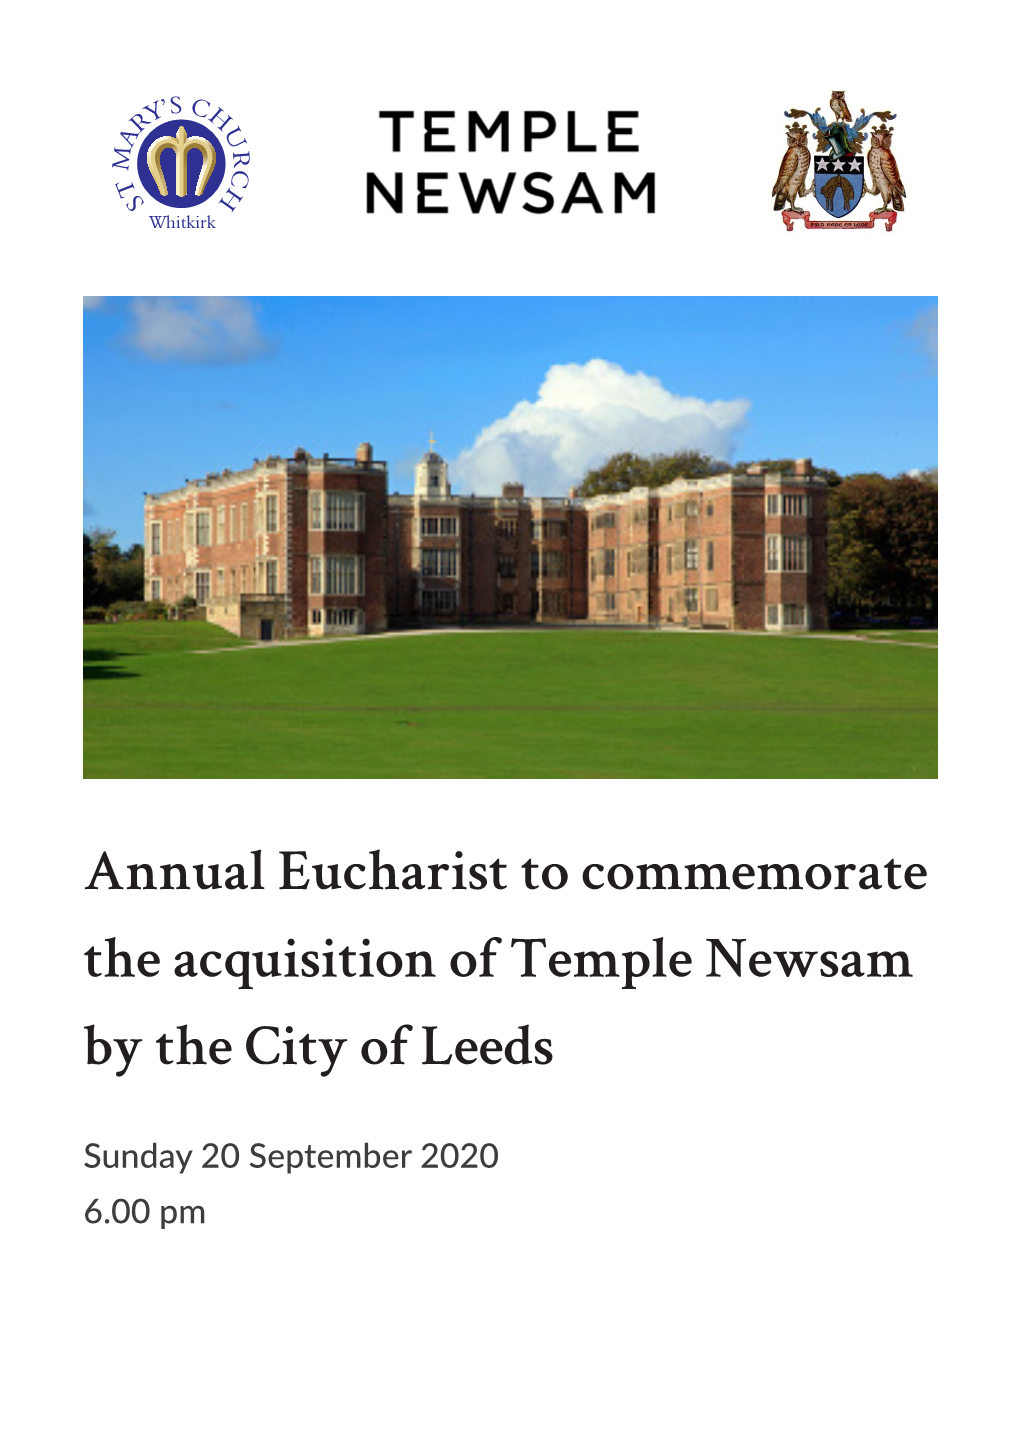 Annual Eucharist to Commemorate the Acquisition of Temple Newsam by the City of Leeds